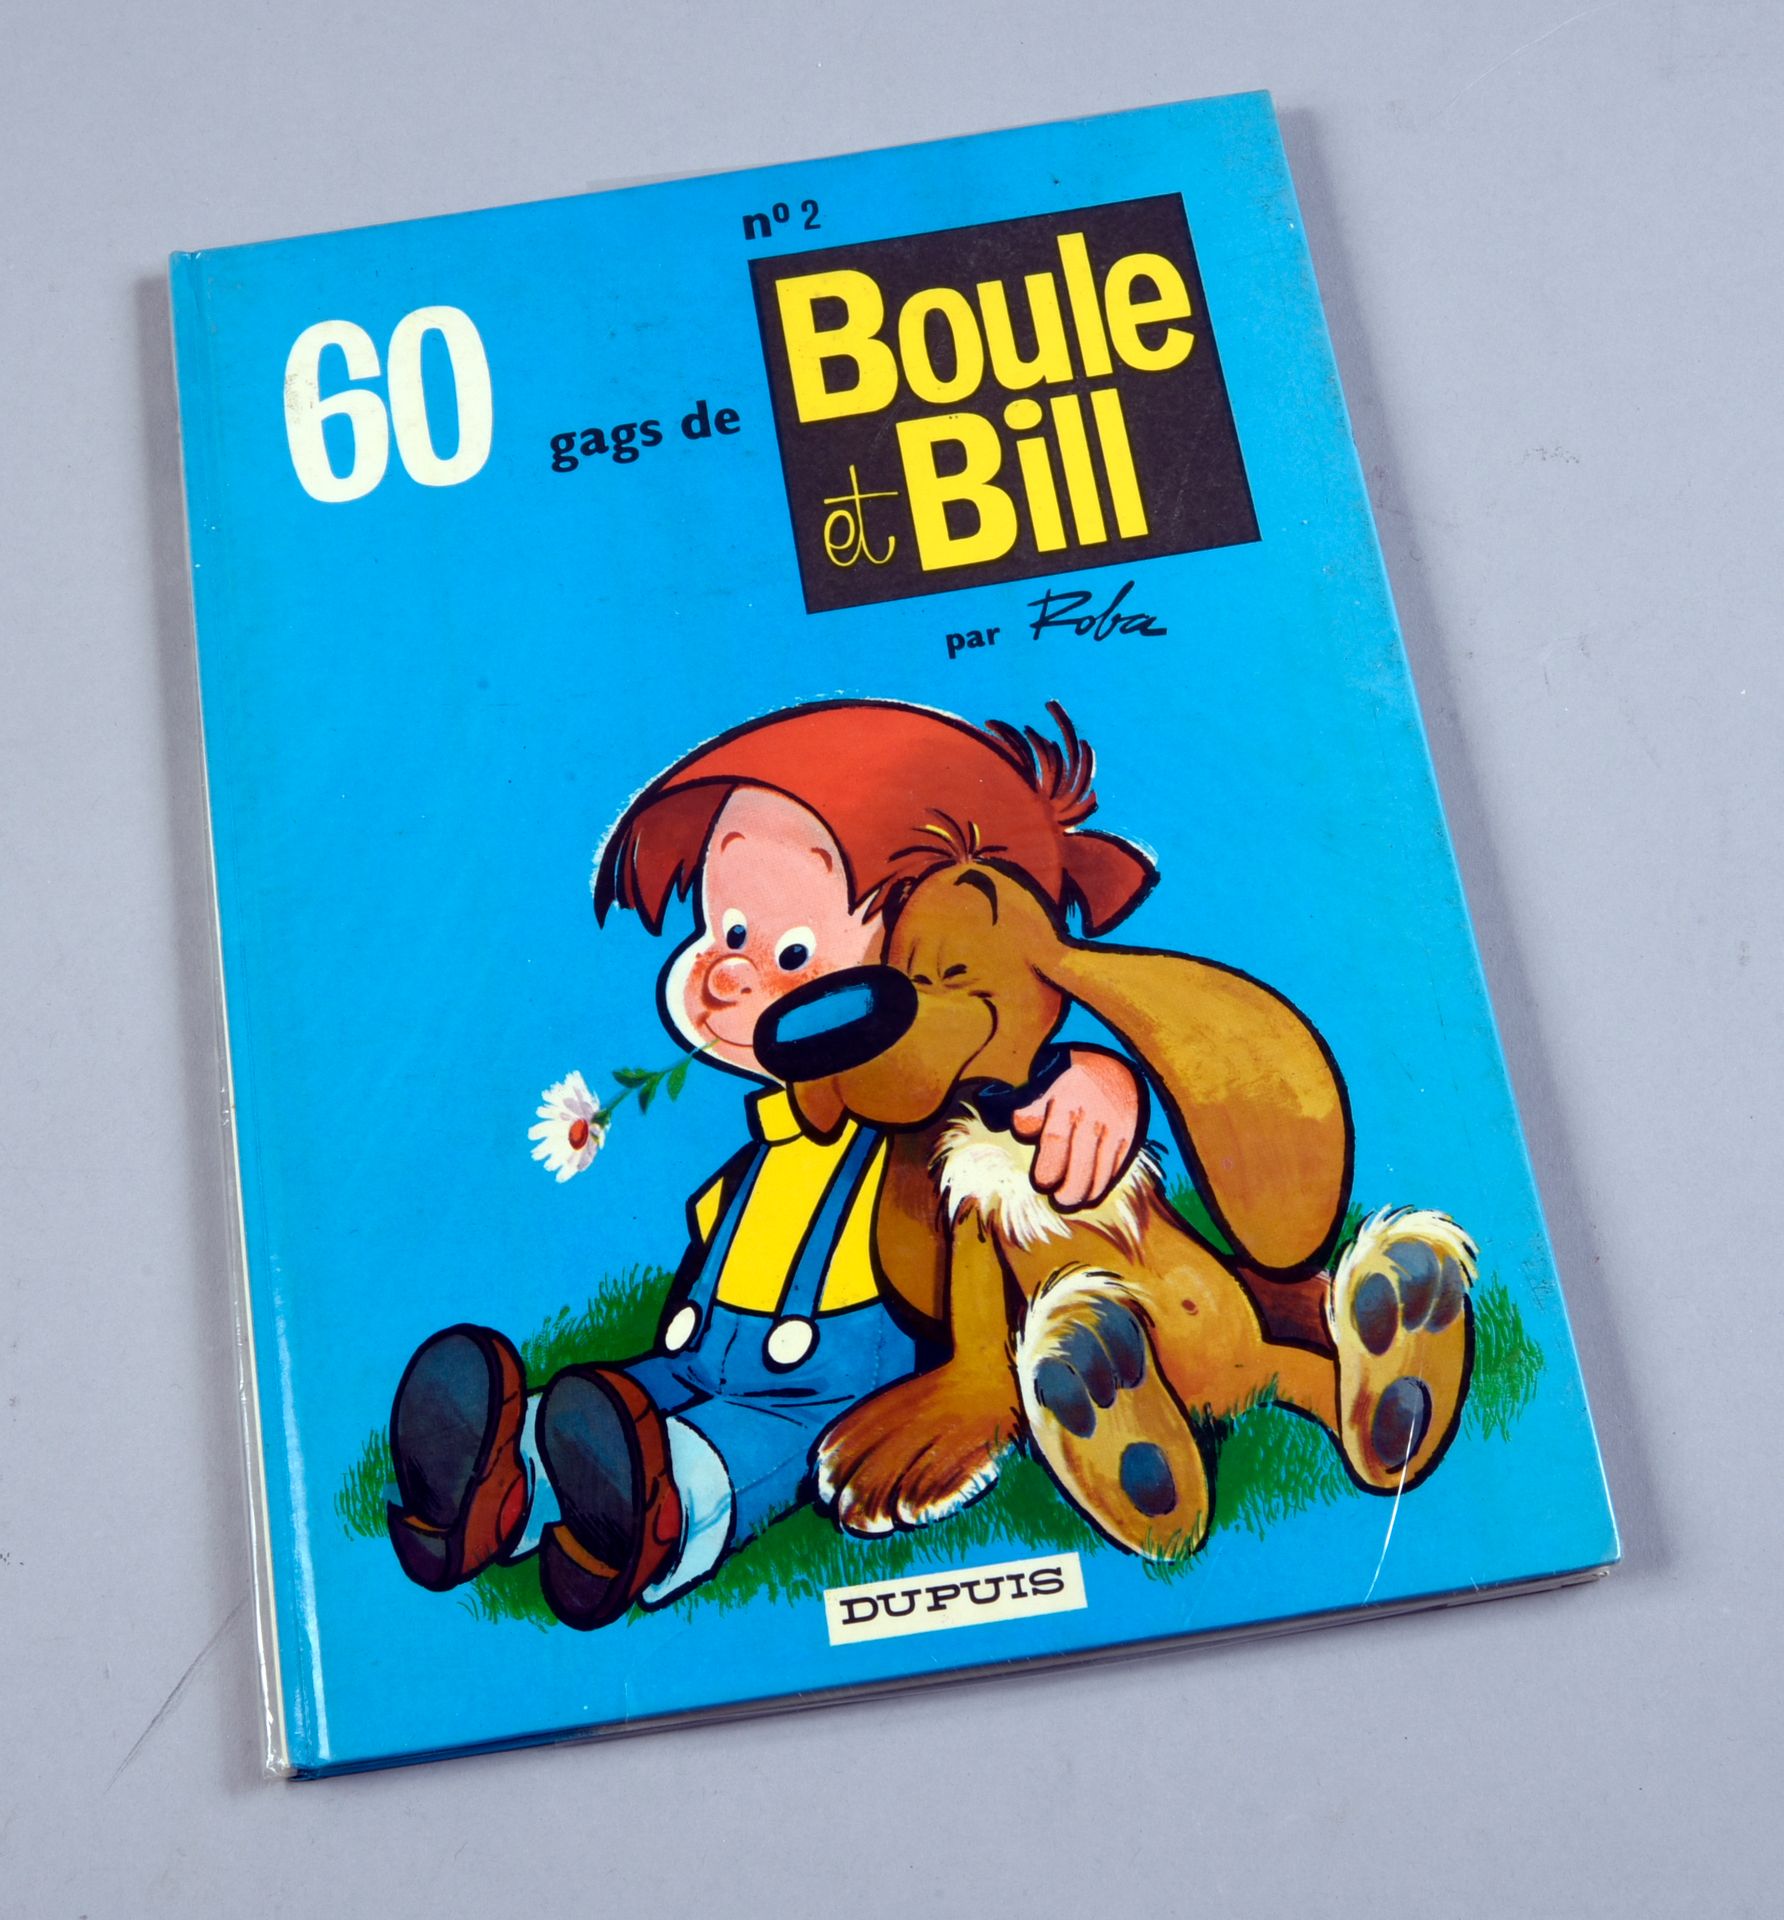 ROBA BOULE ET BILL N°2. Edition Dupuis 1983, with a dedication drawing in felt p&hellip;